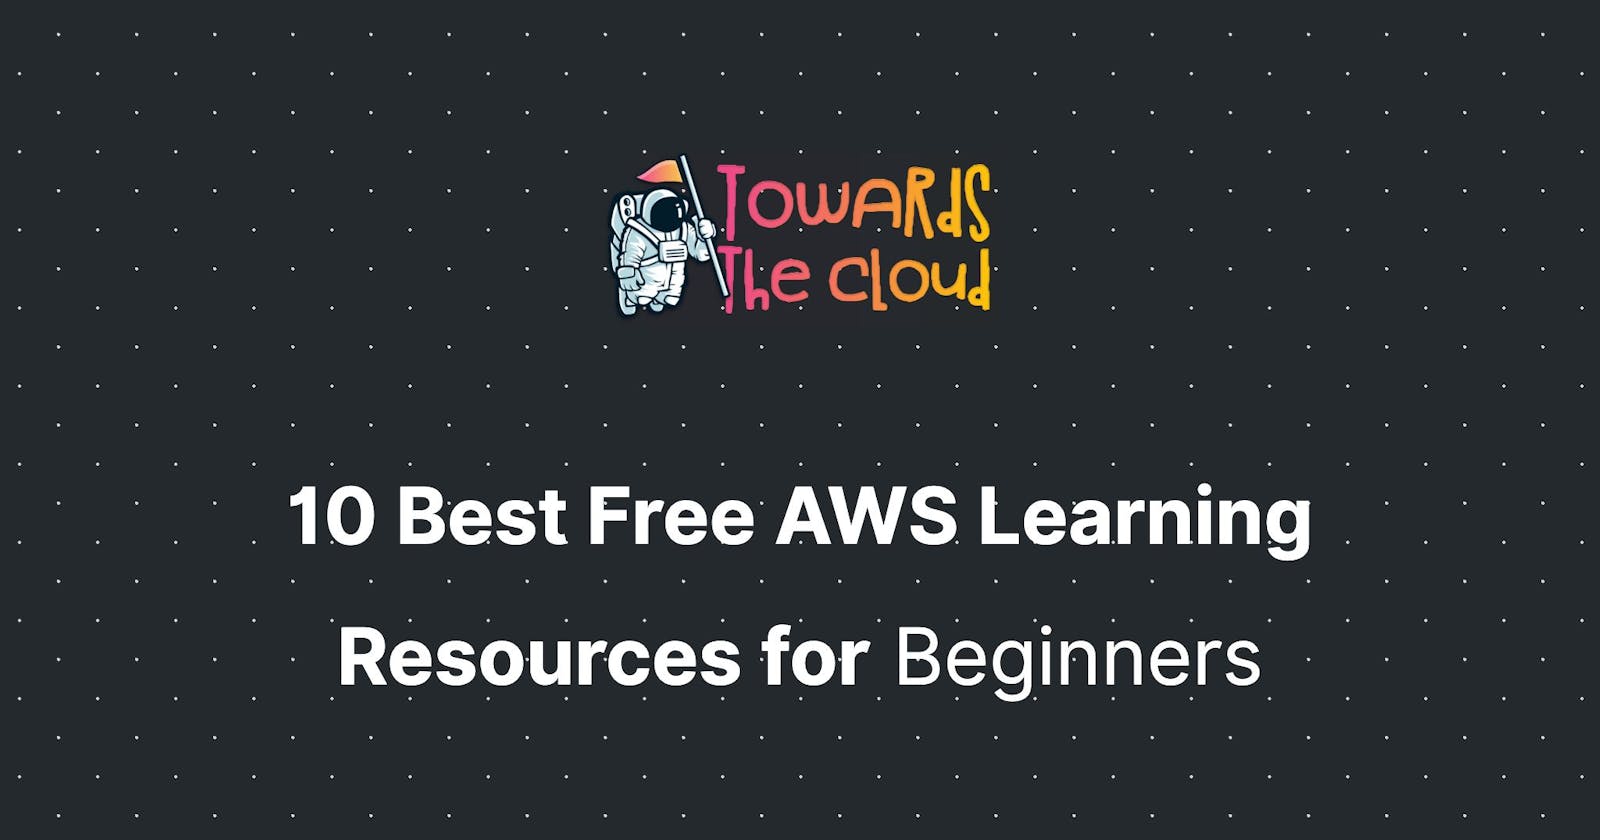 10 Best Free AWS Learning Resources for Beginners